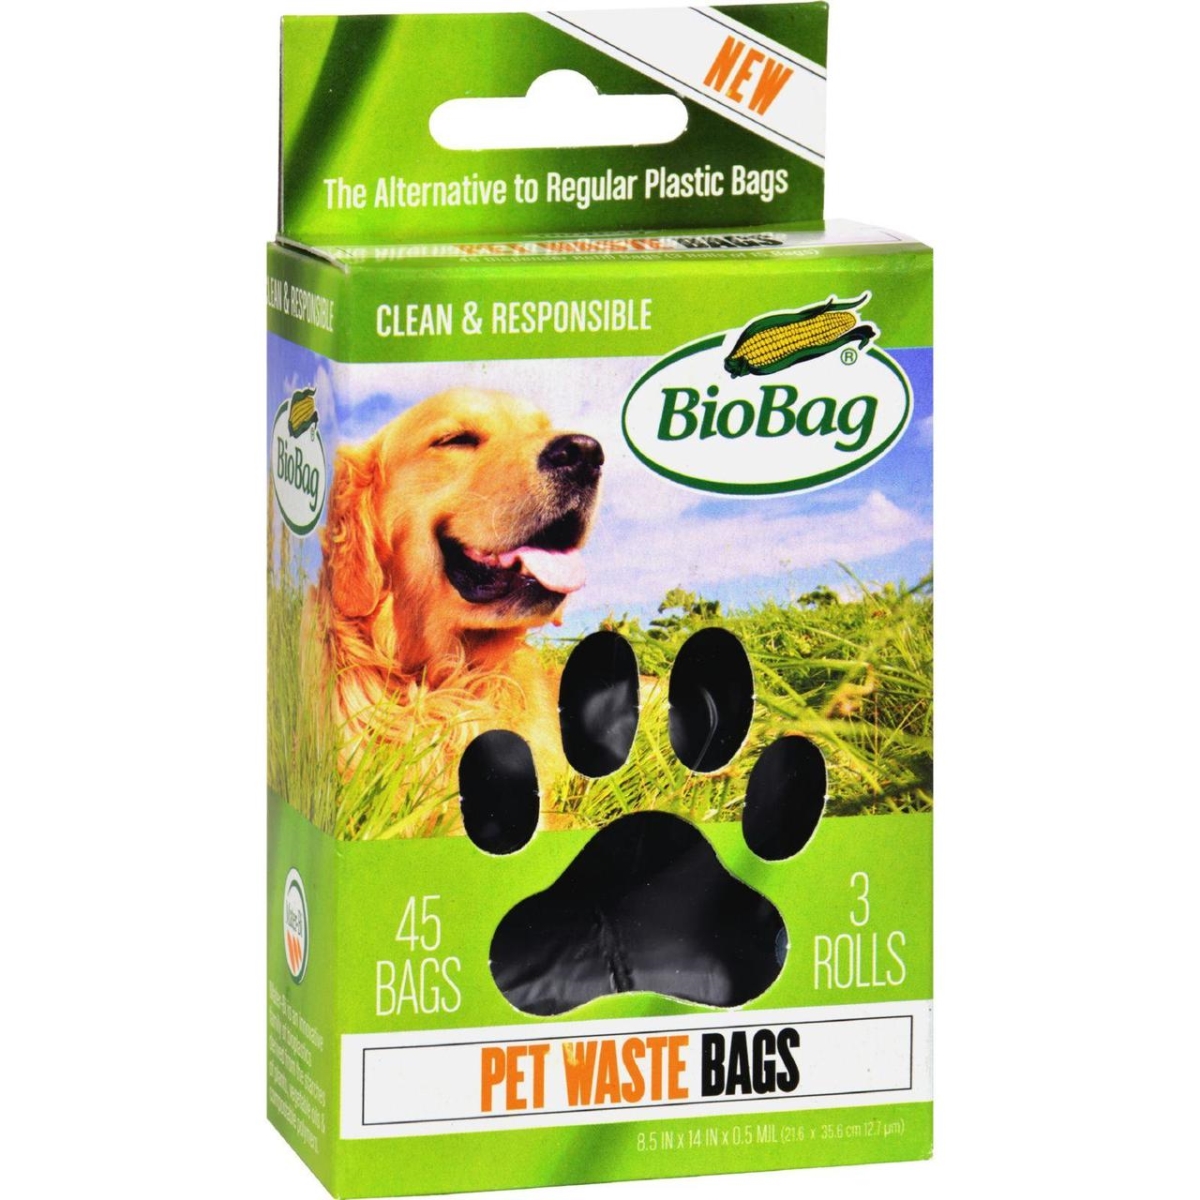 Hg1268796 Dog Waste Bags On A Roll - 45 Count, Case Of 12